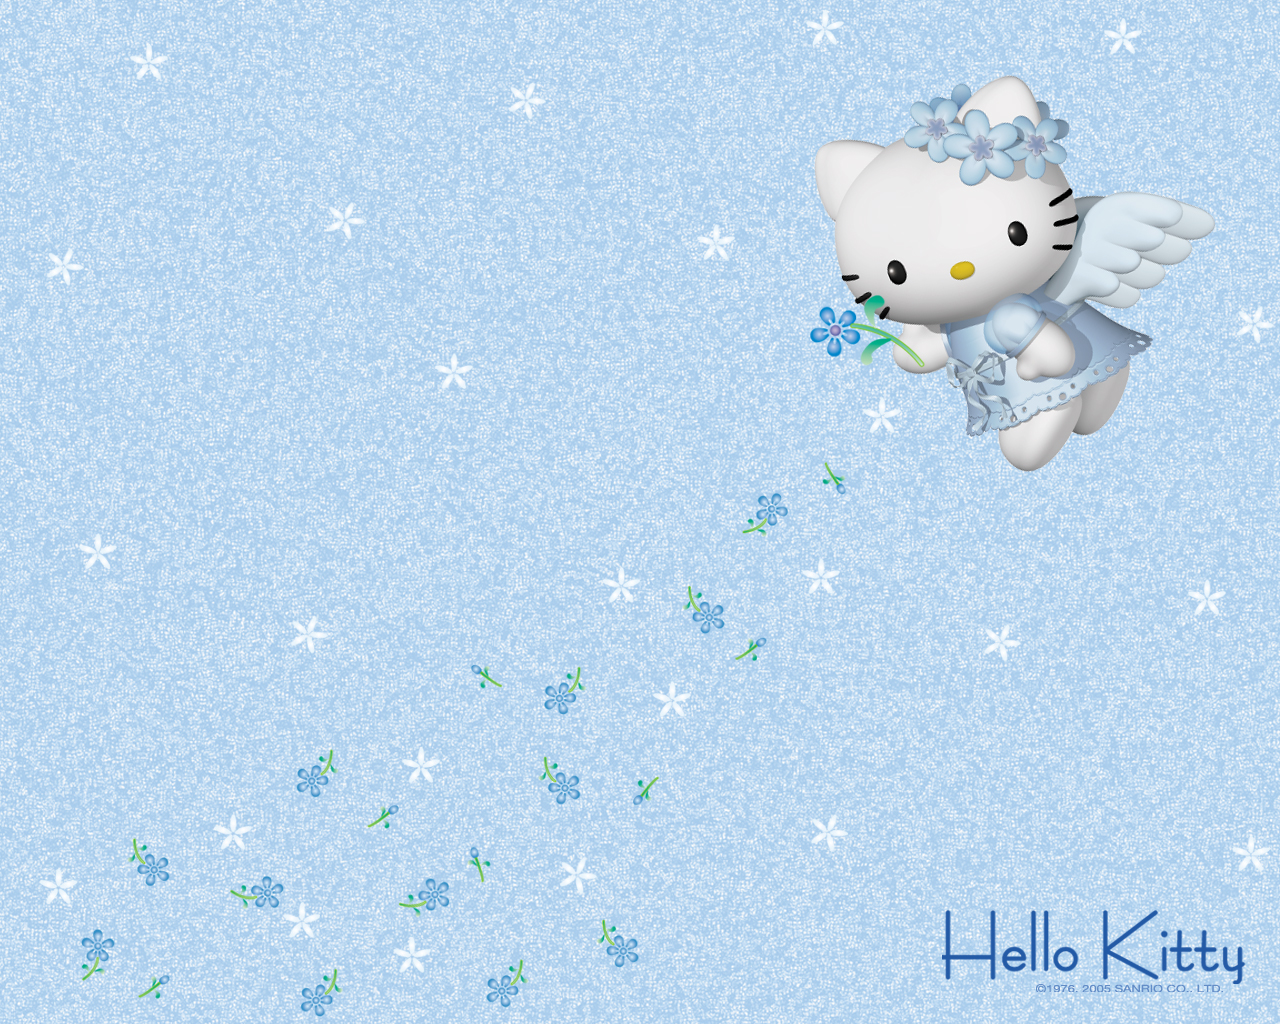 HELLO KITTY  Hello kitty wallpaper, Hello kitty backgrounds, Hello kitty  pictures